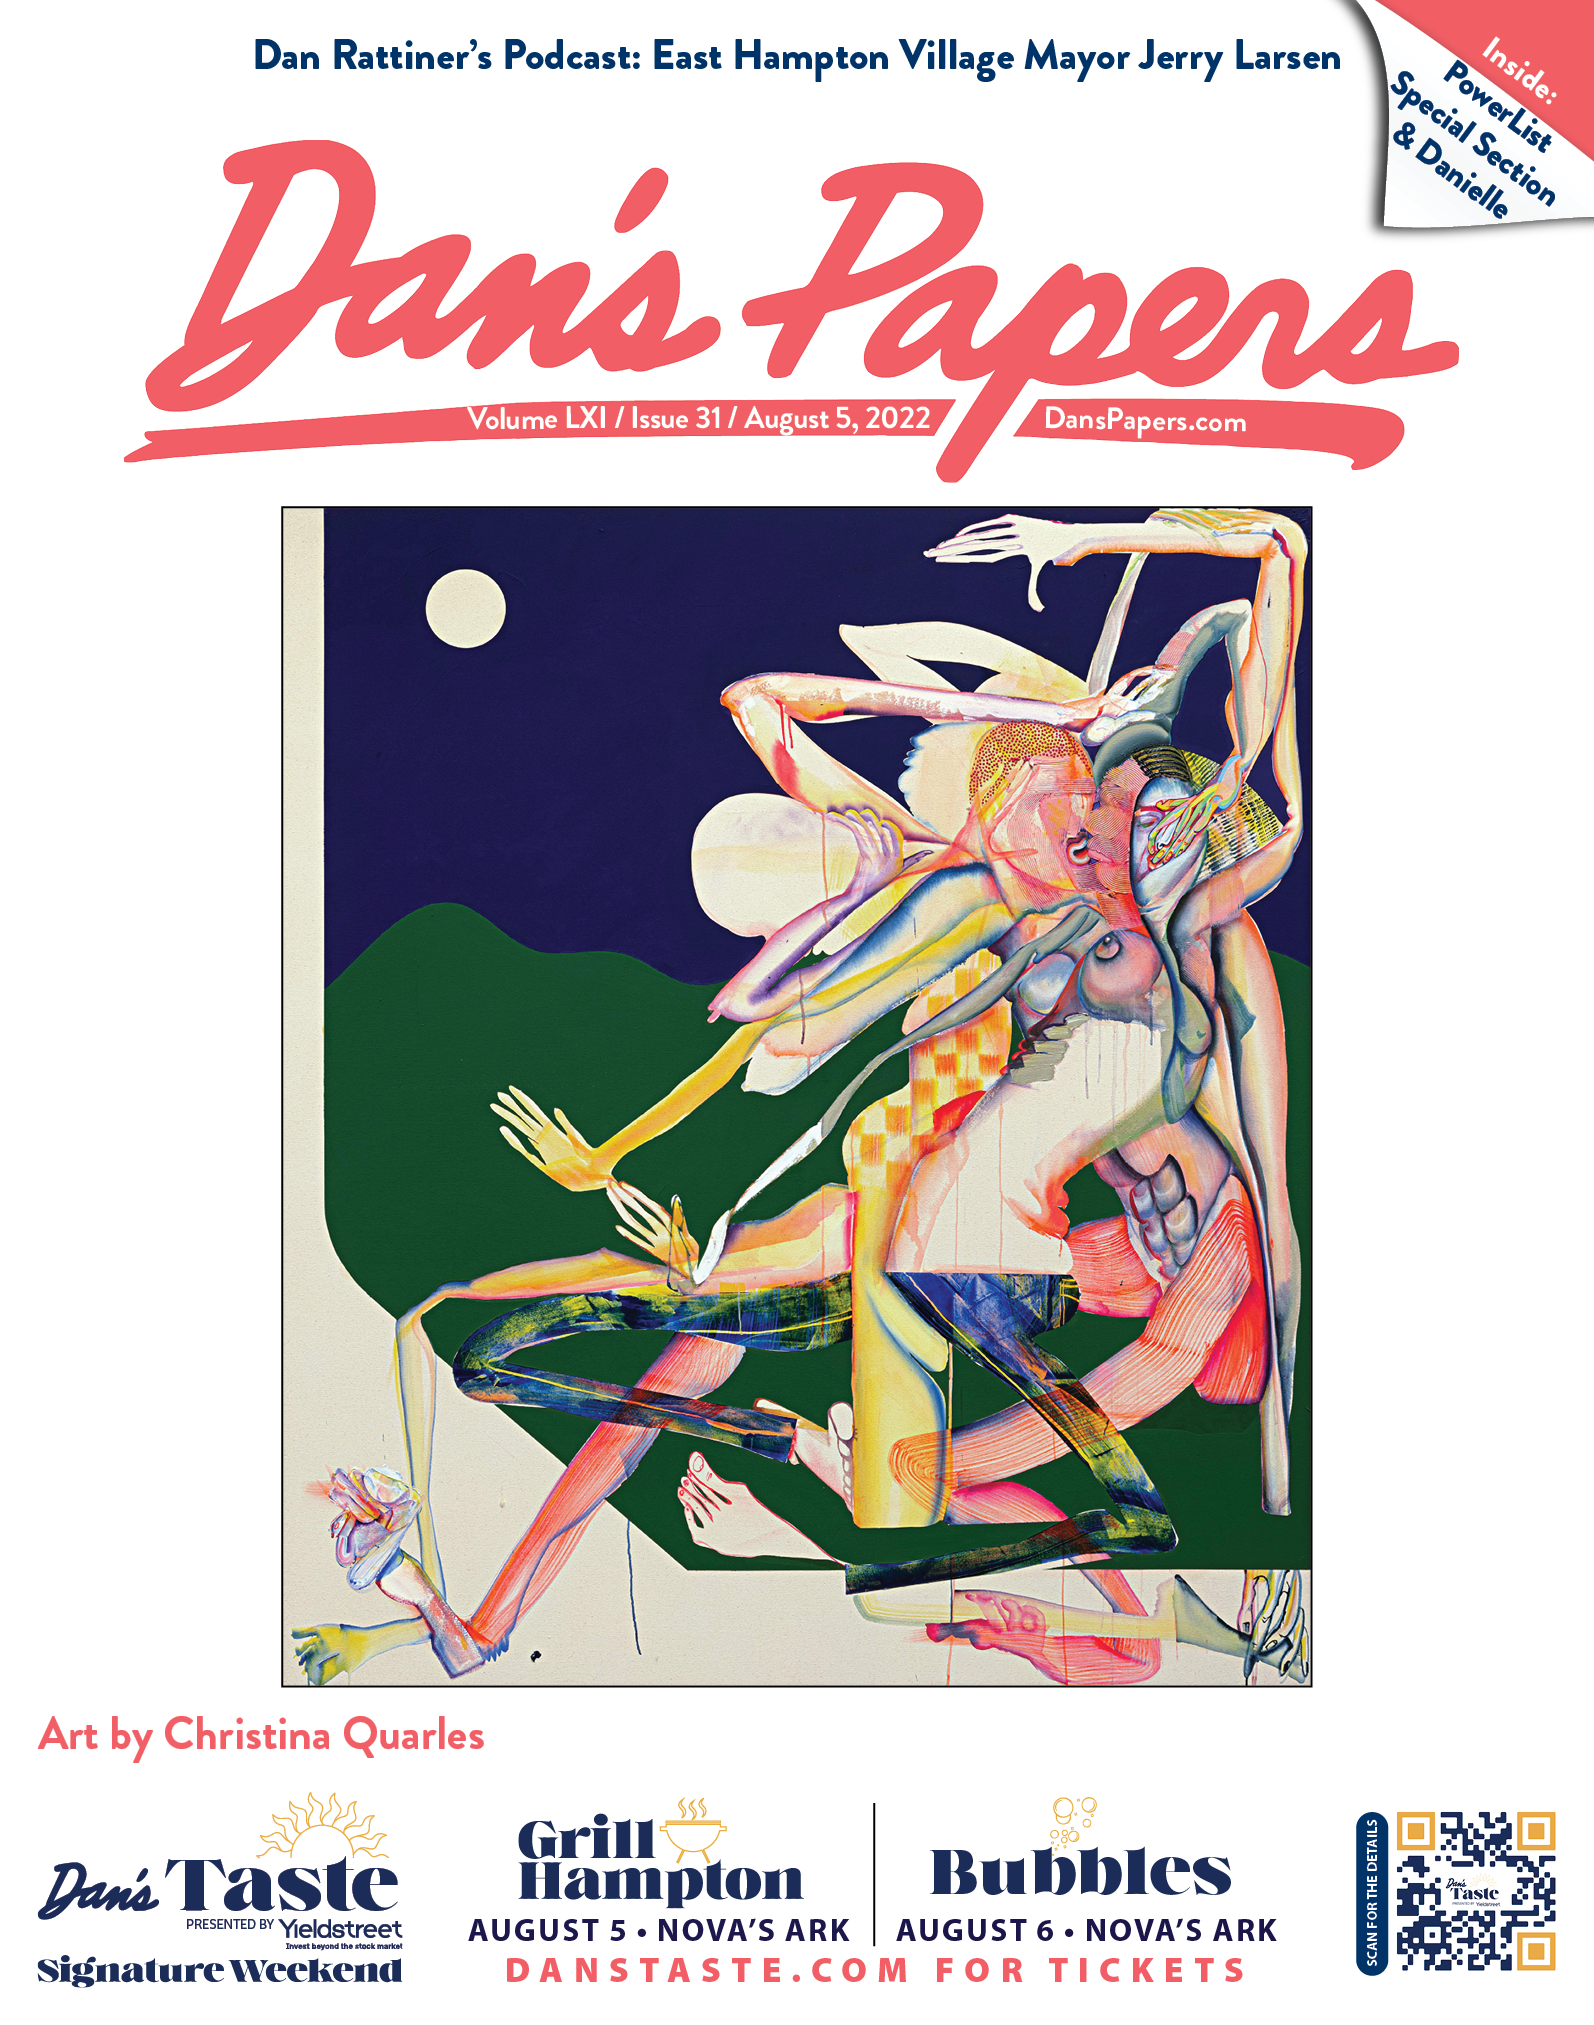 August 5, 2022 Dan's Papers cover art: "Night Fell Upon Us (Up On Us)" 2019 acrylic painting by Christina Quarles © Christina Quarles / Courtesy the artist, Hauser & Wirth, and Pilar Corrias, London.